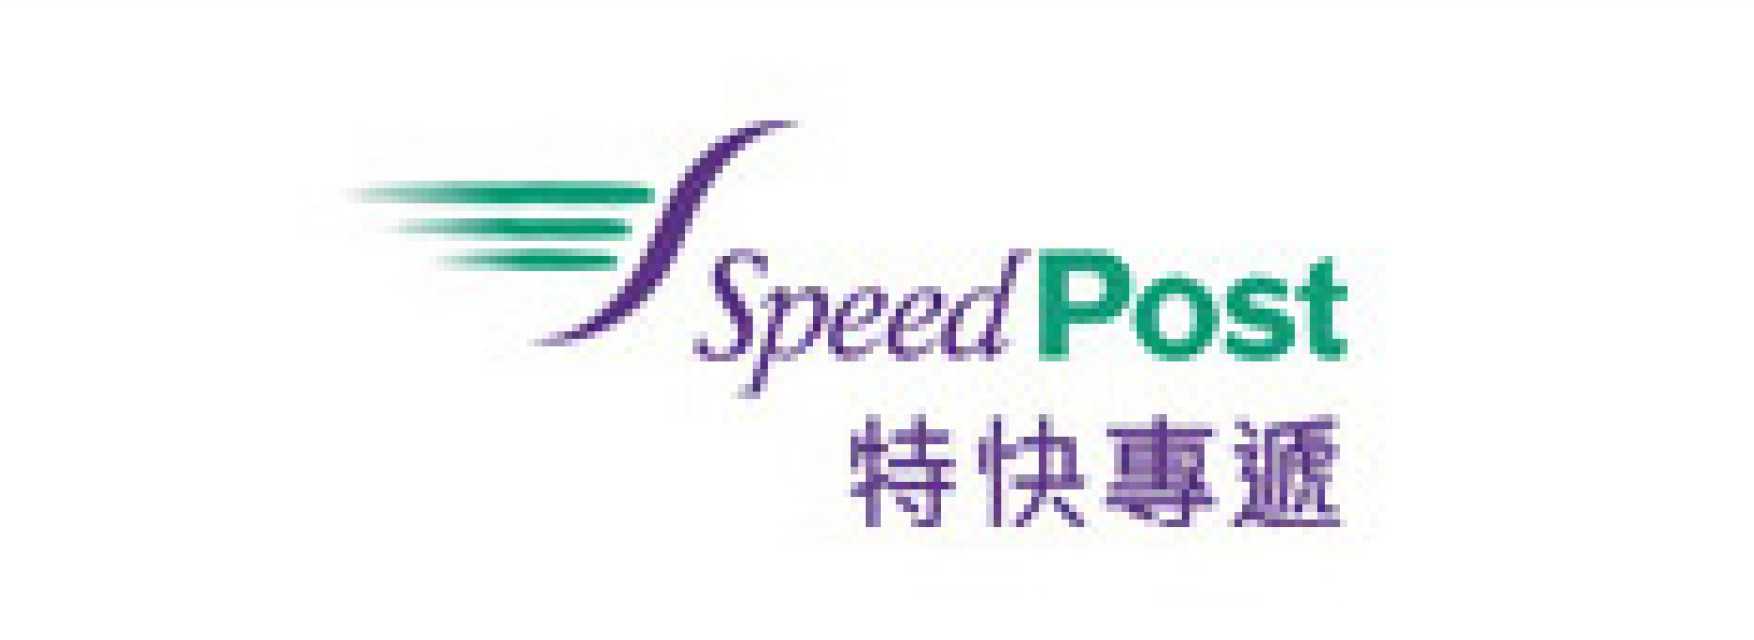 Speedpost - Delivers the World - Hongkong Post | Track & Trace